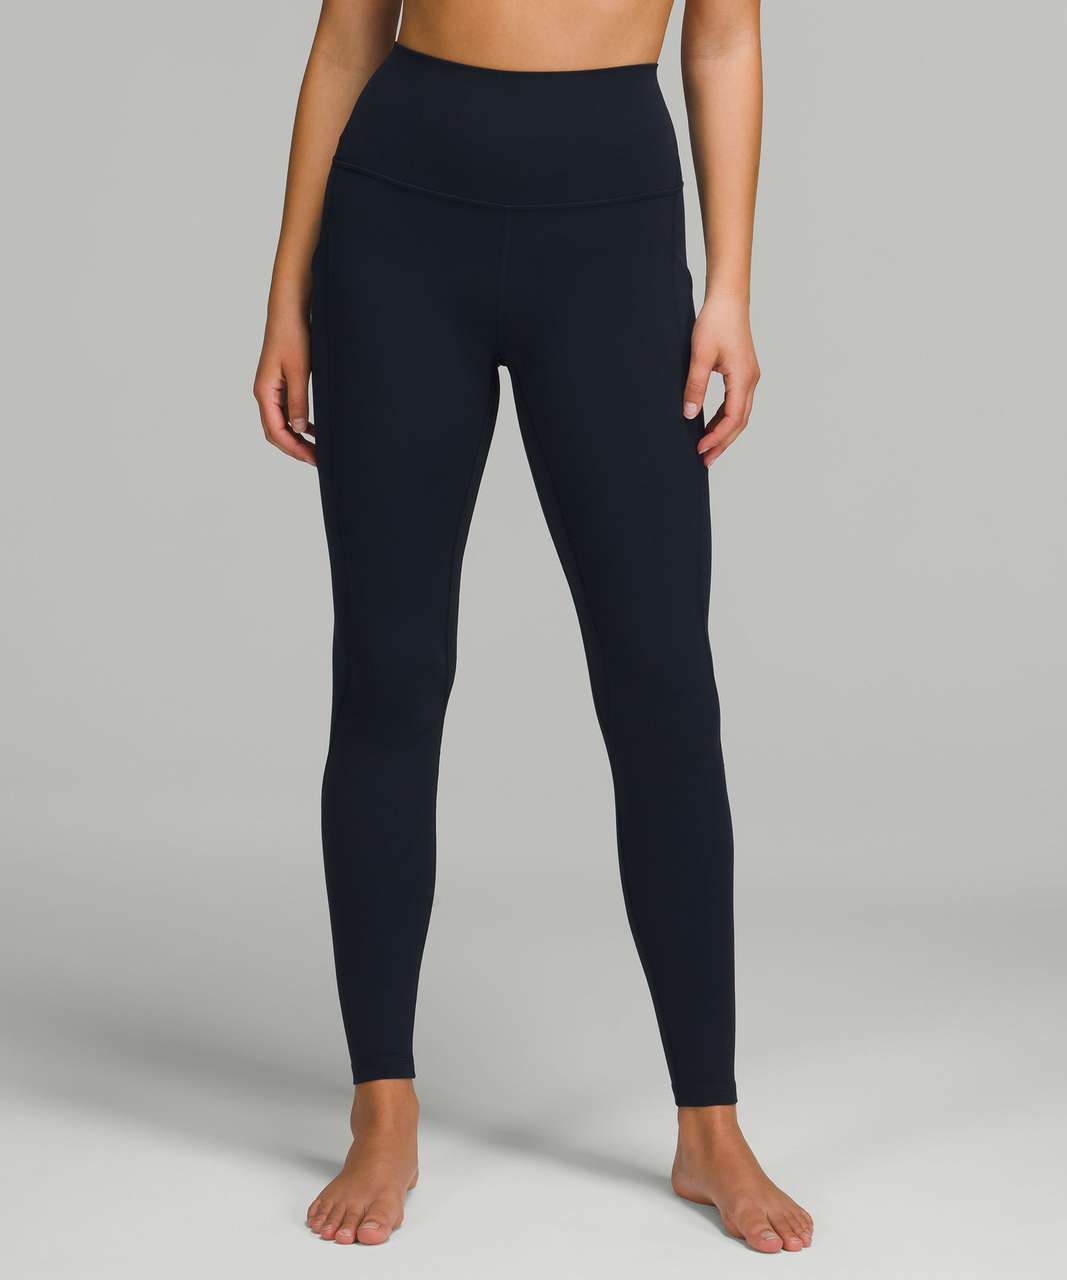 Lululemon Align High-Rise Pant with Pockets 31" - True Navy